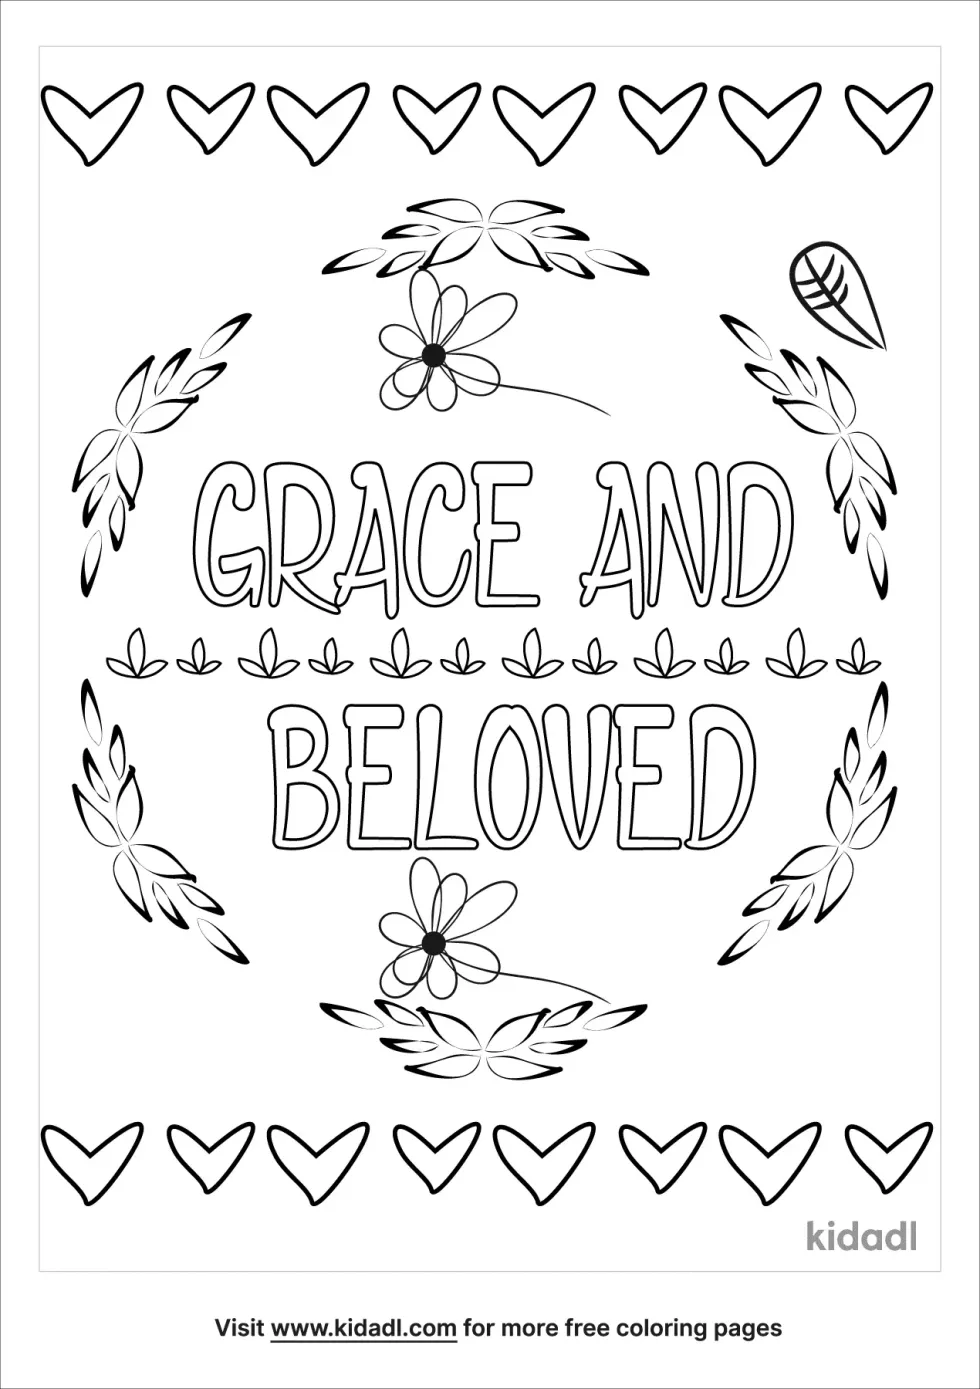 Grace And Beloved Coloring Page